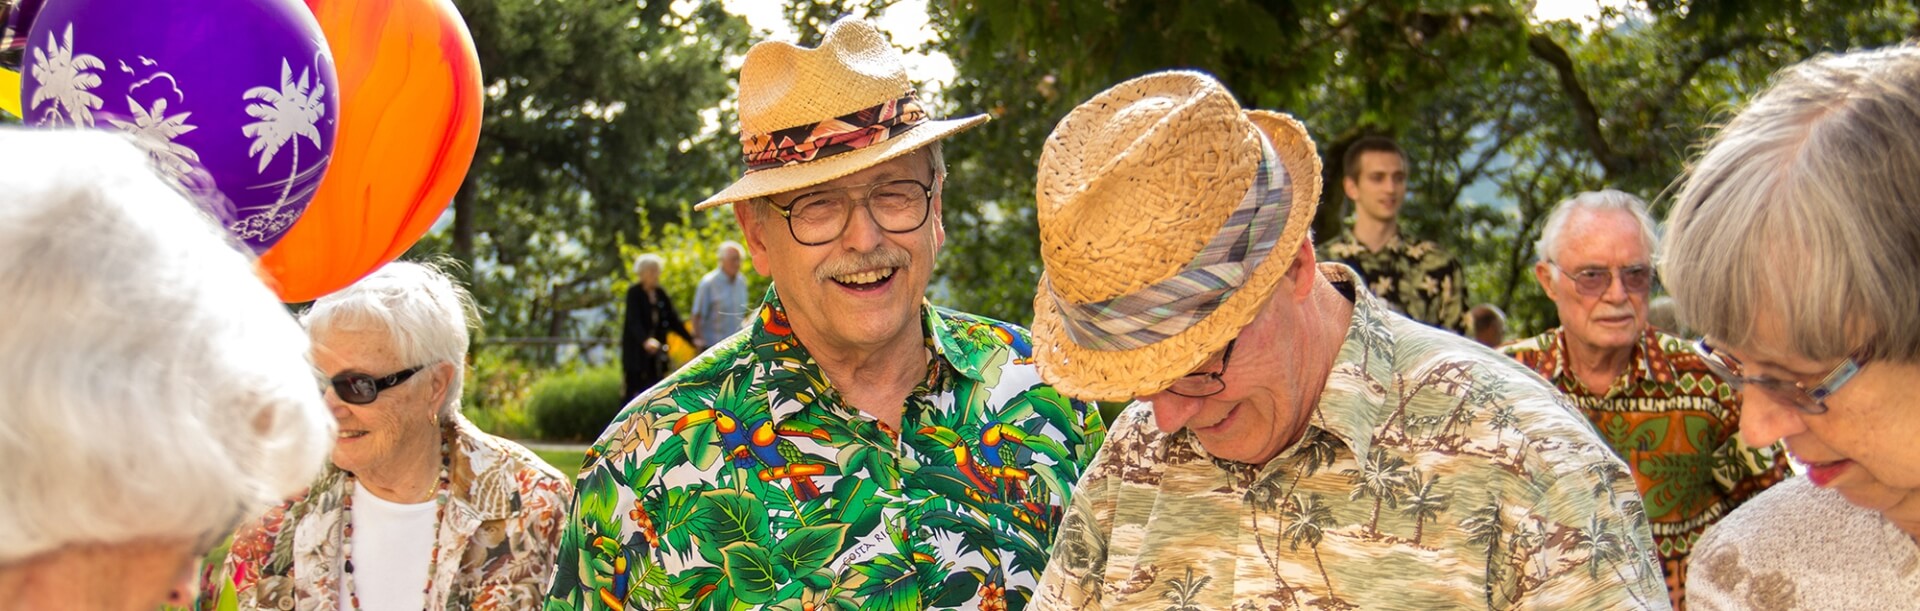 An outdoor Hawaiian-themed party showing several happy residents